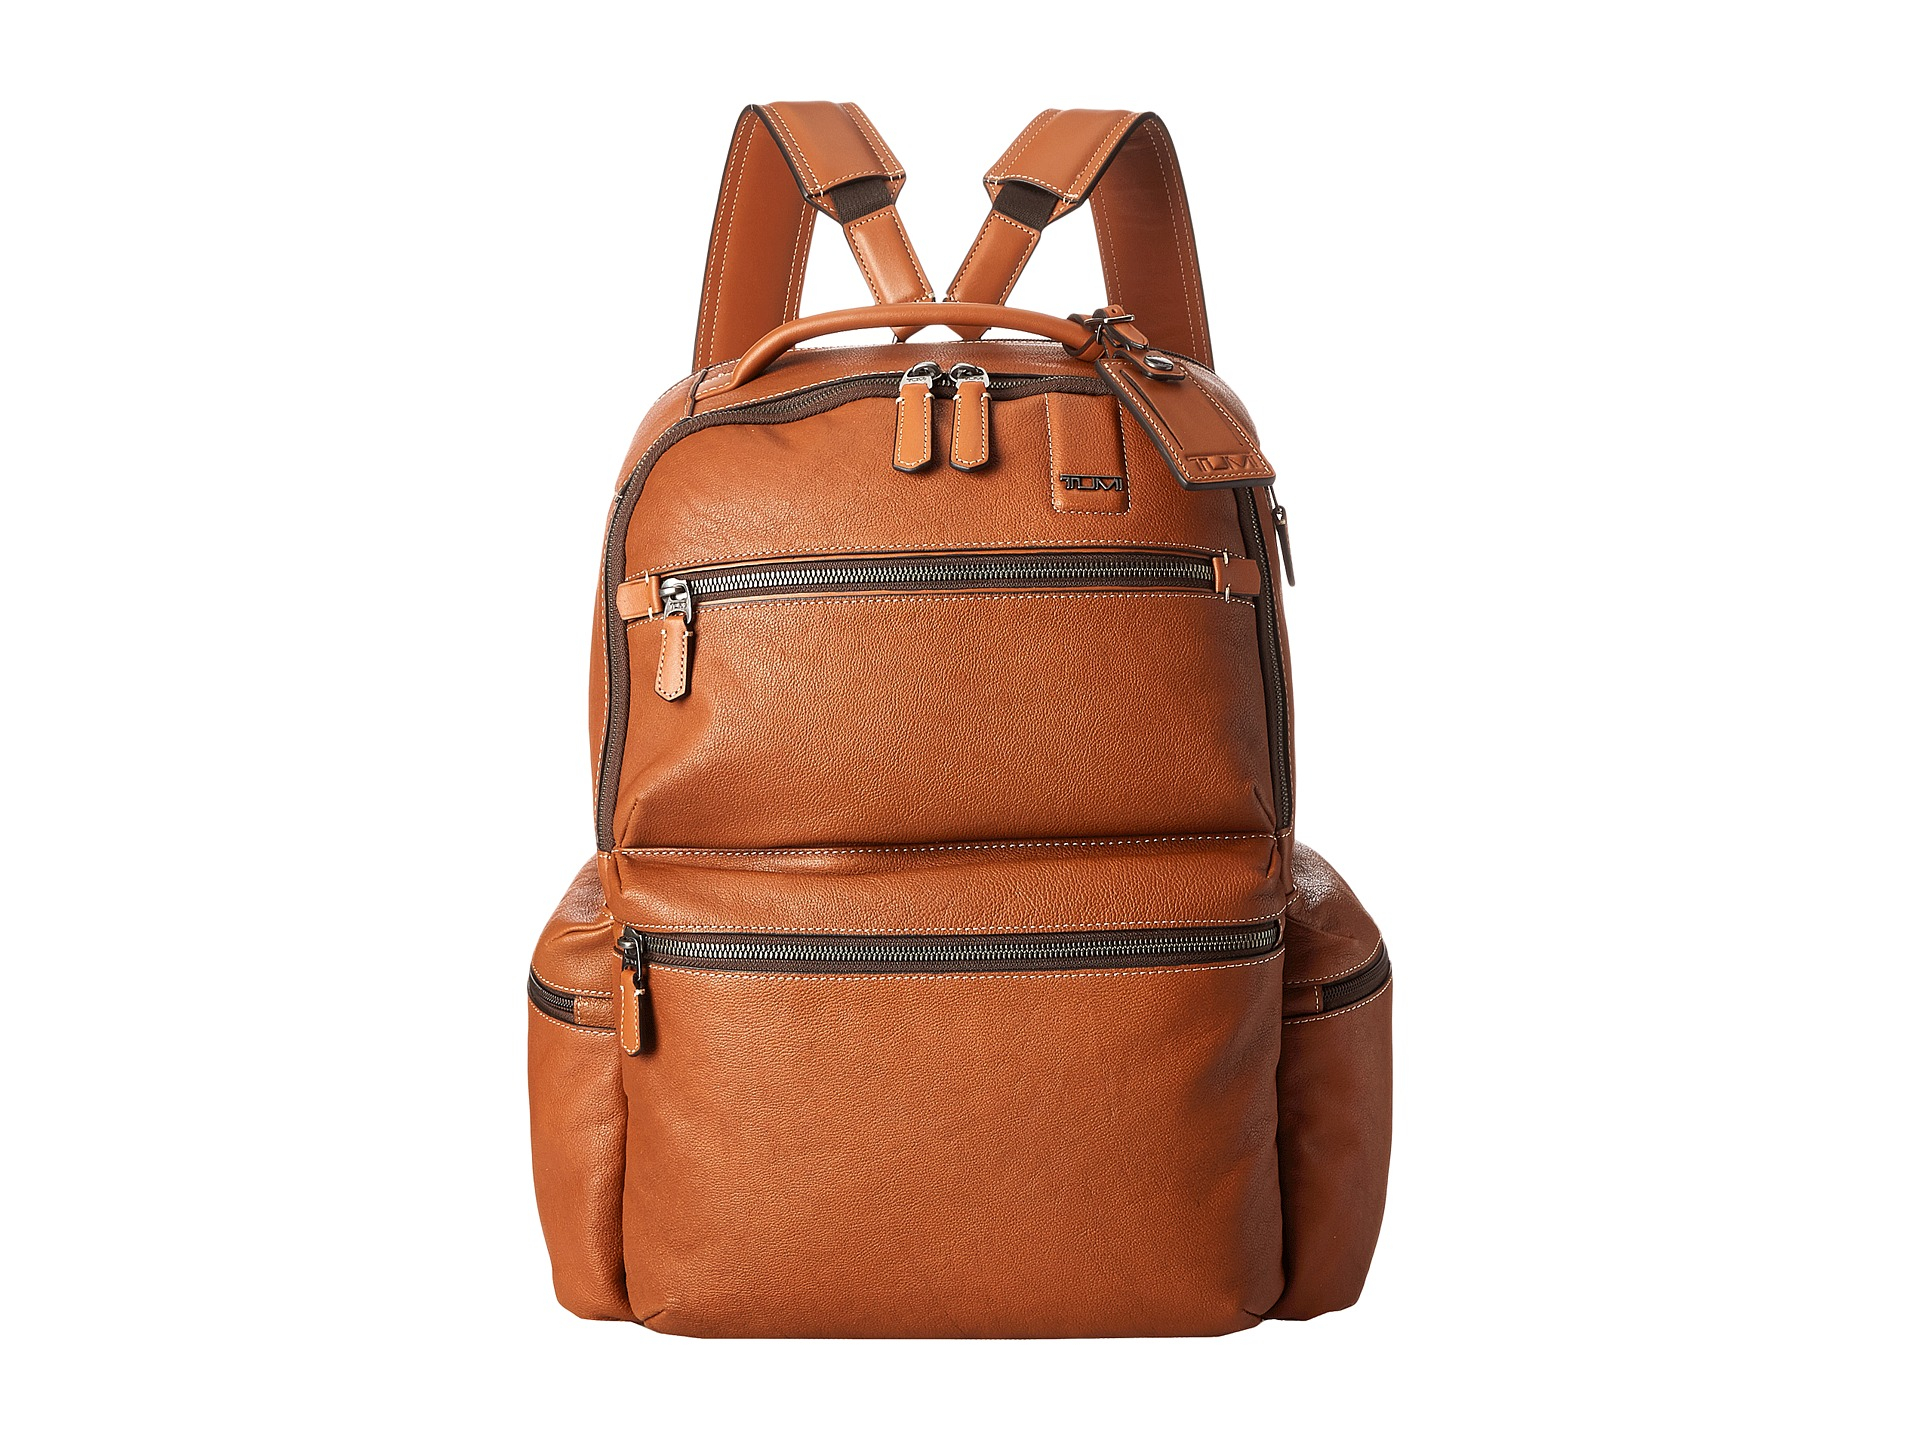 Tumi Beacon Hill Revere Brief Pack in Tan (Brown) for Men - Lyst